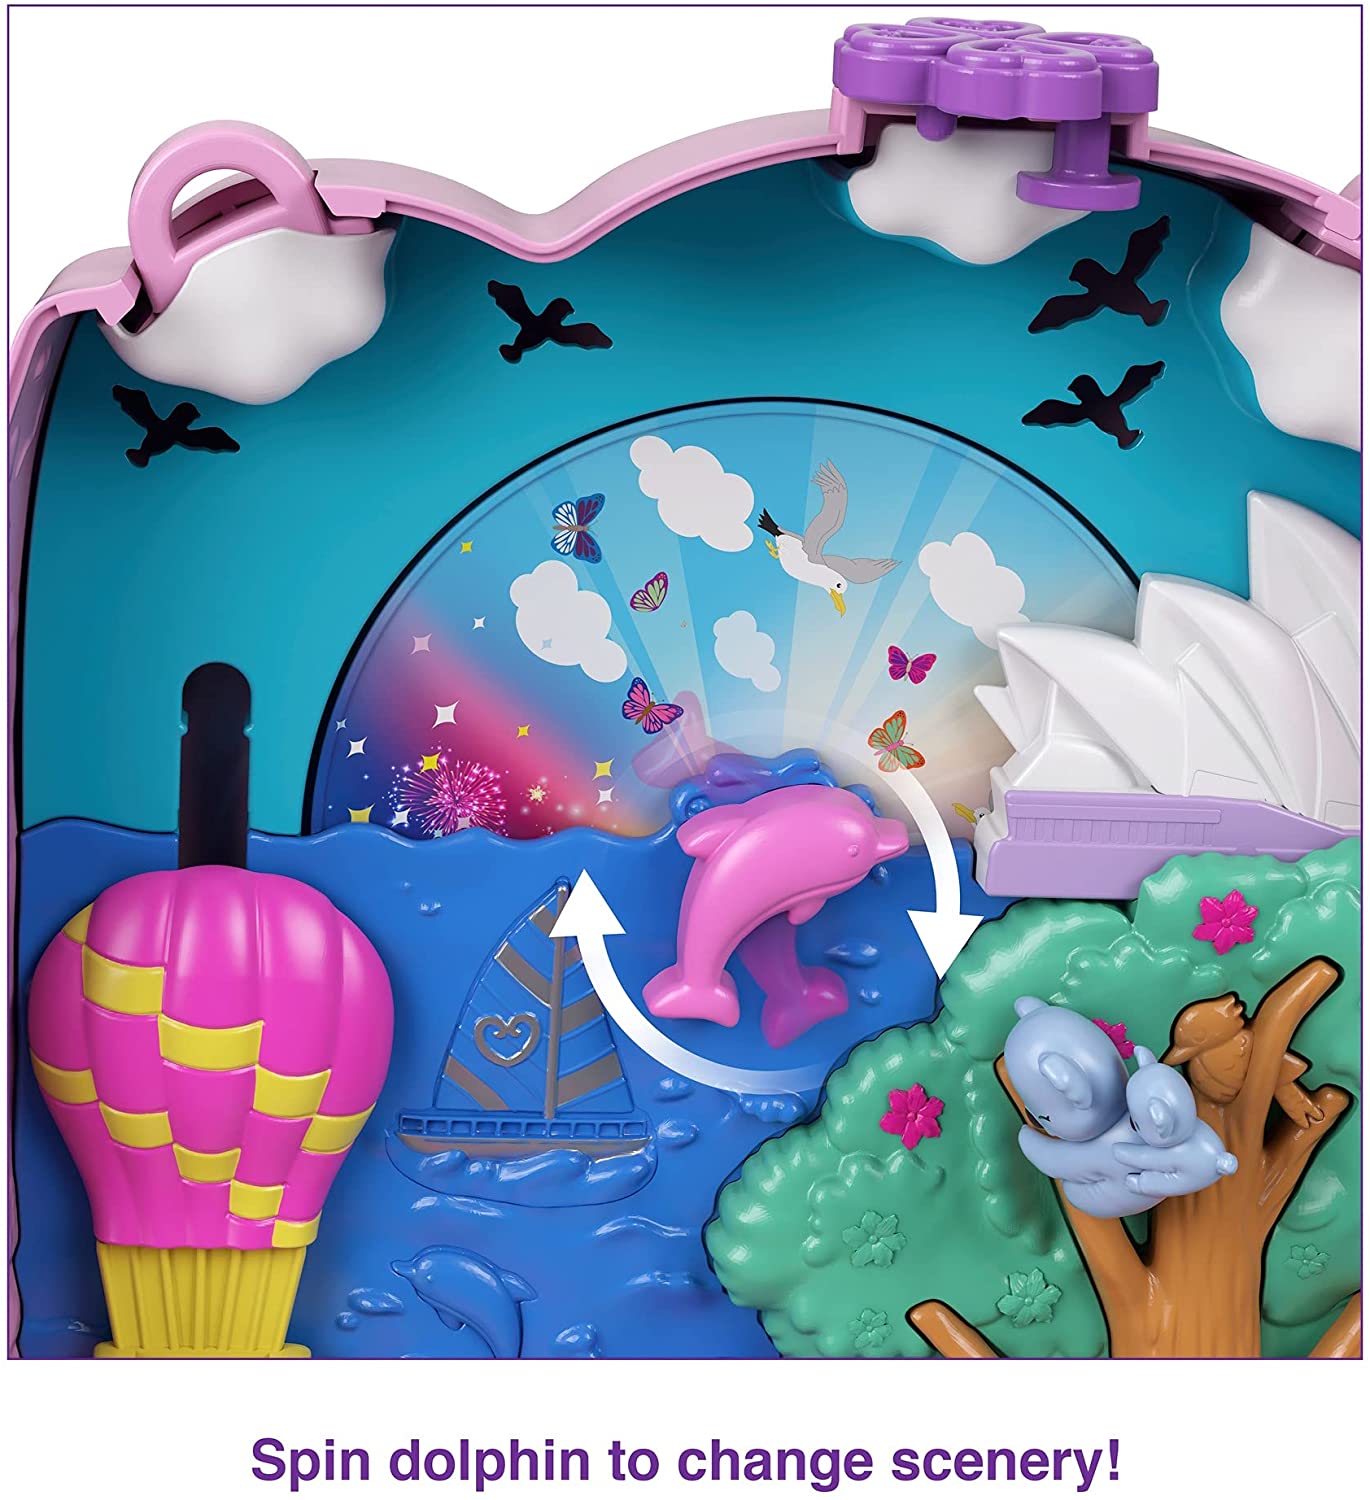 Time for Tiny Pawprints adventure with Polly Pocket! Perfect for